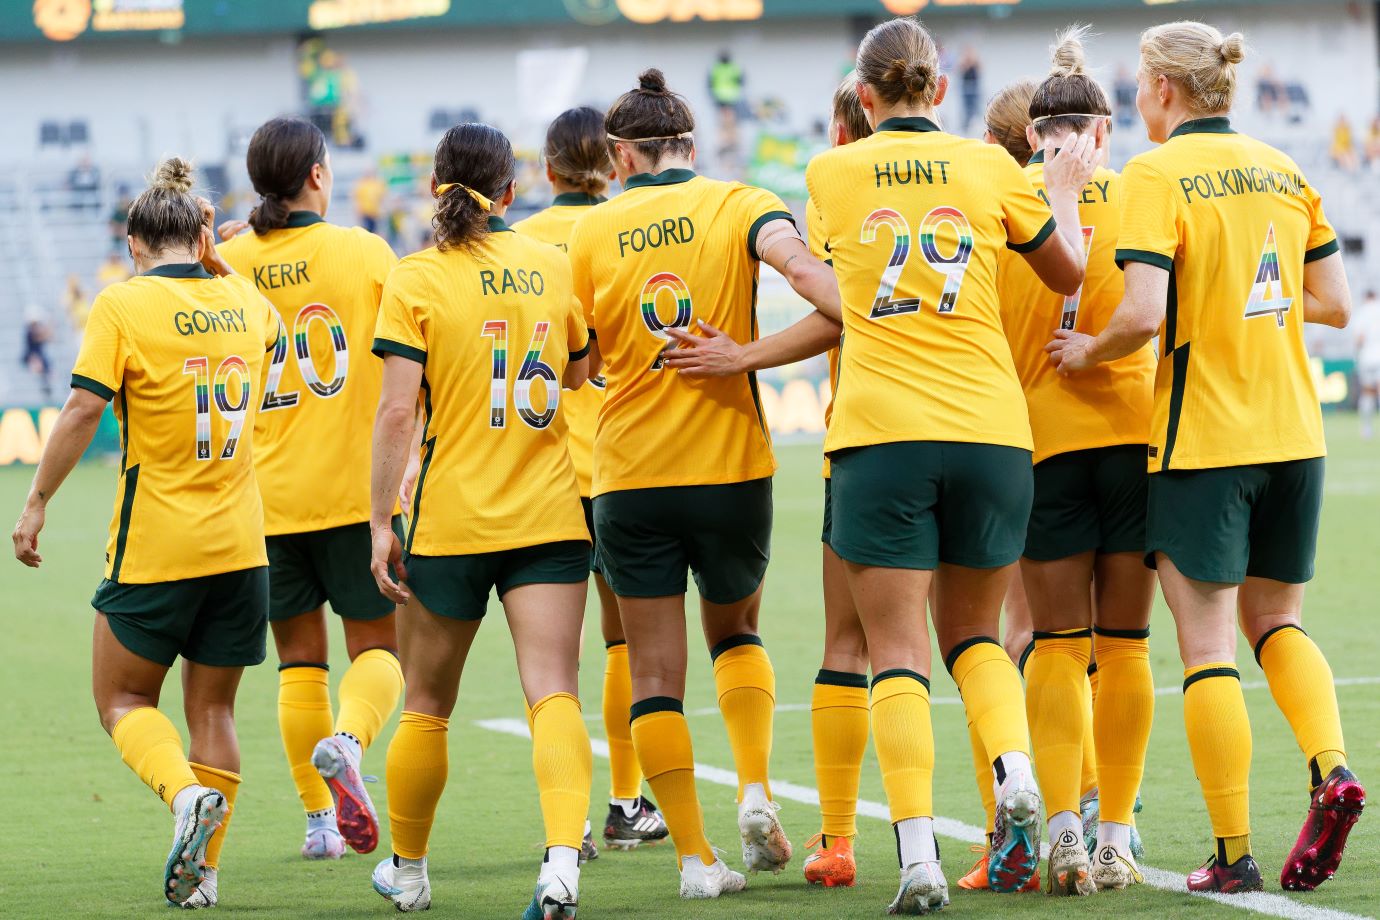 Win or lose tonight, the Matildas have already achieved so much